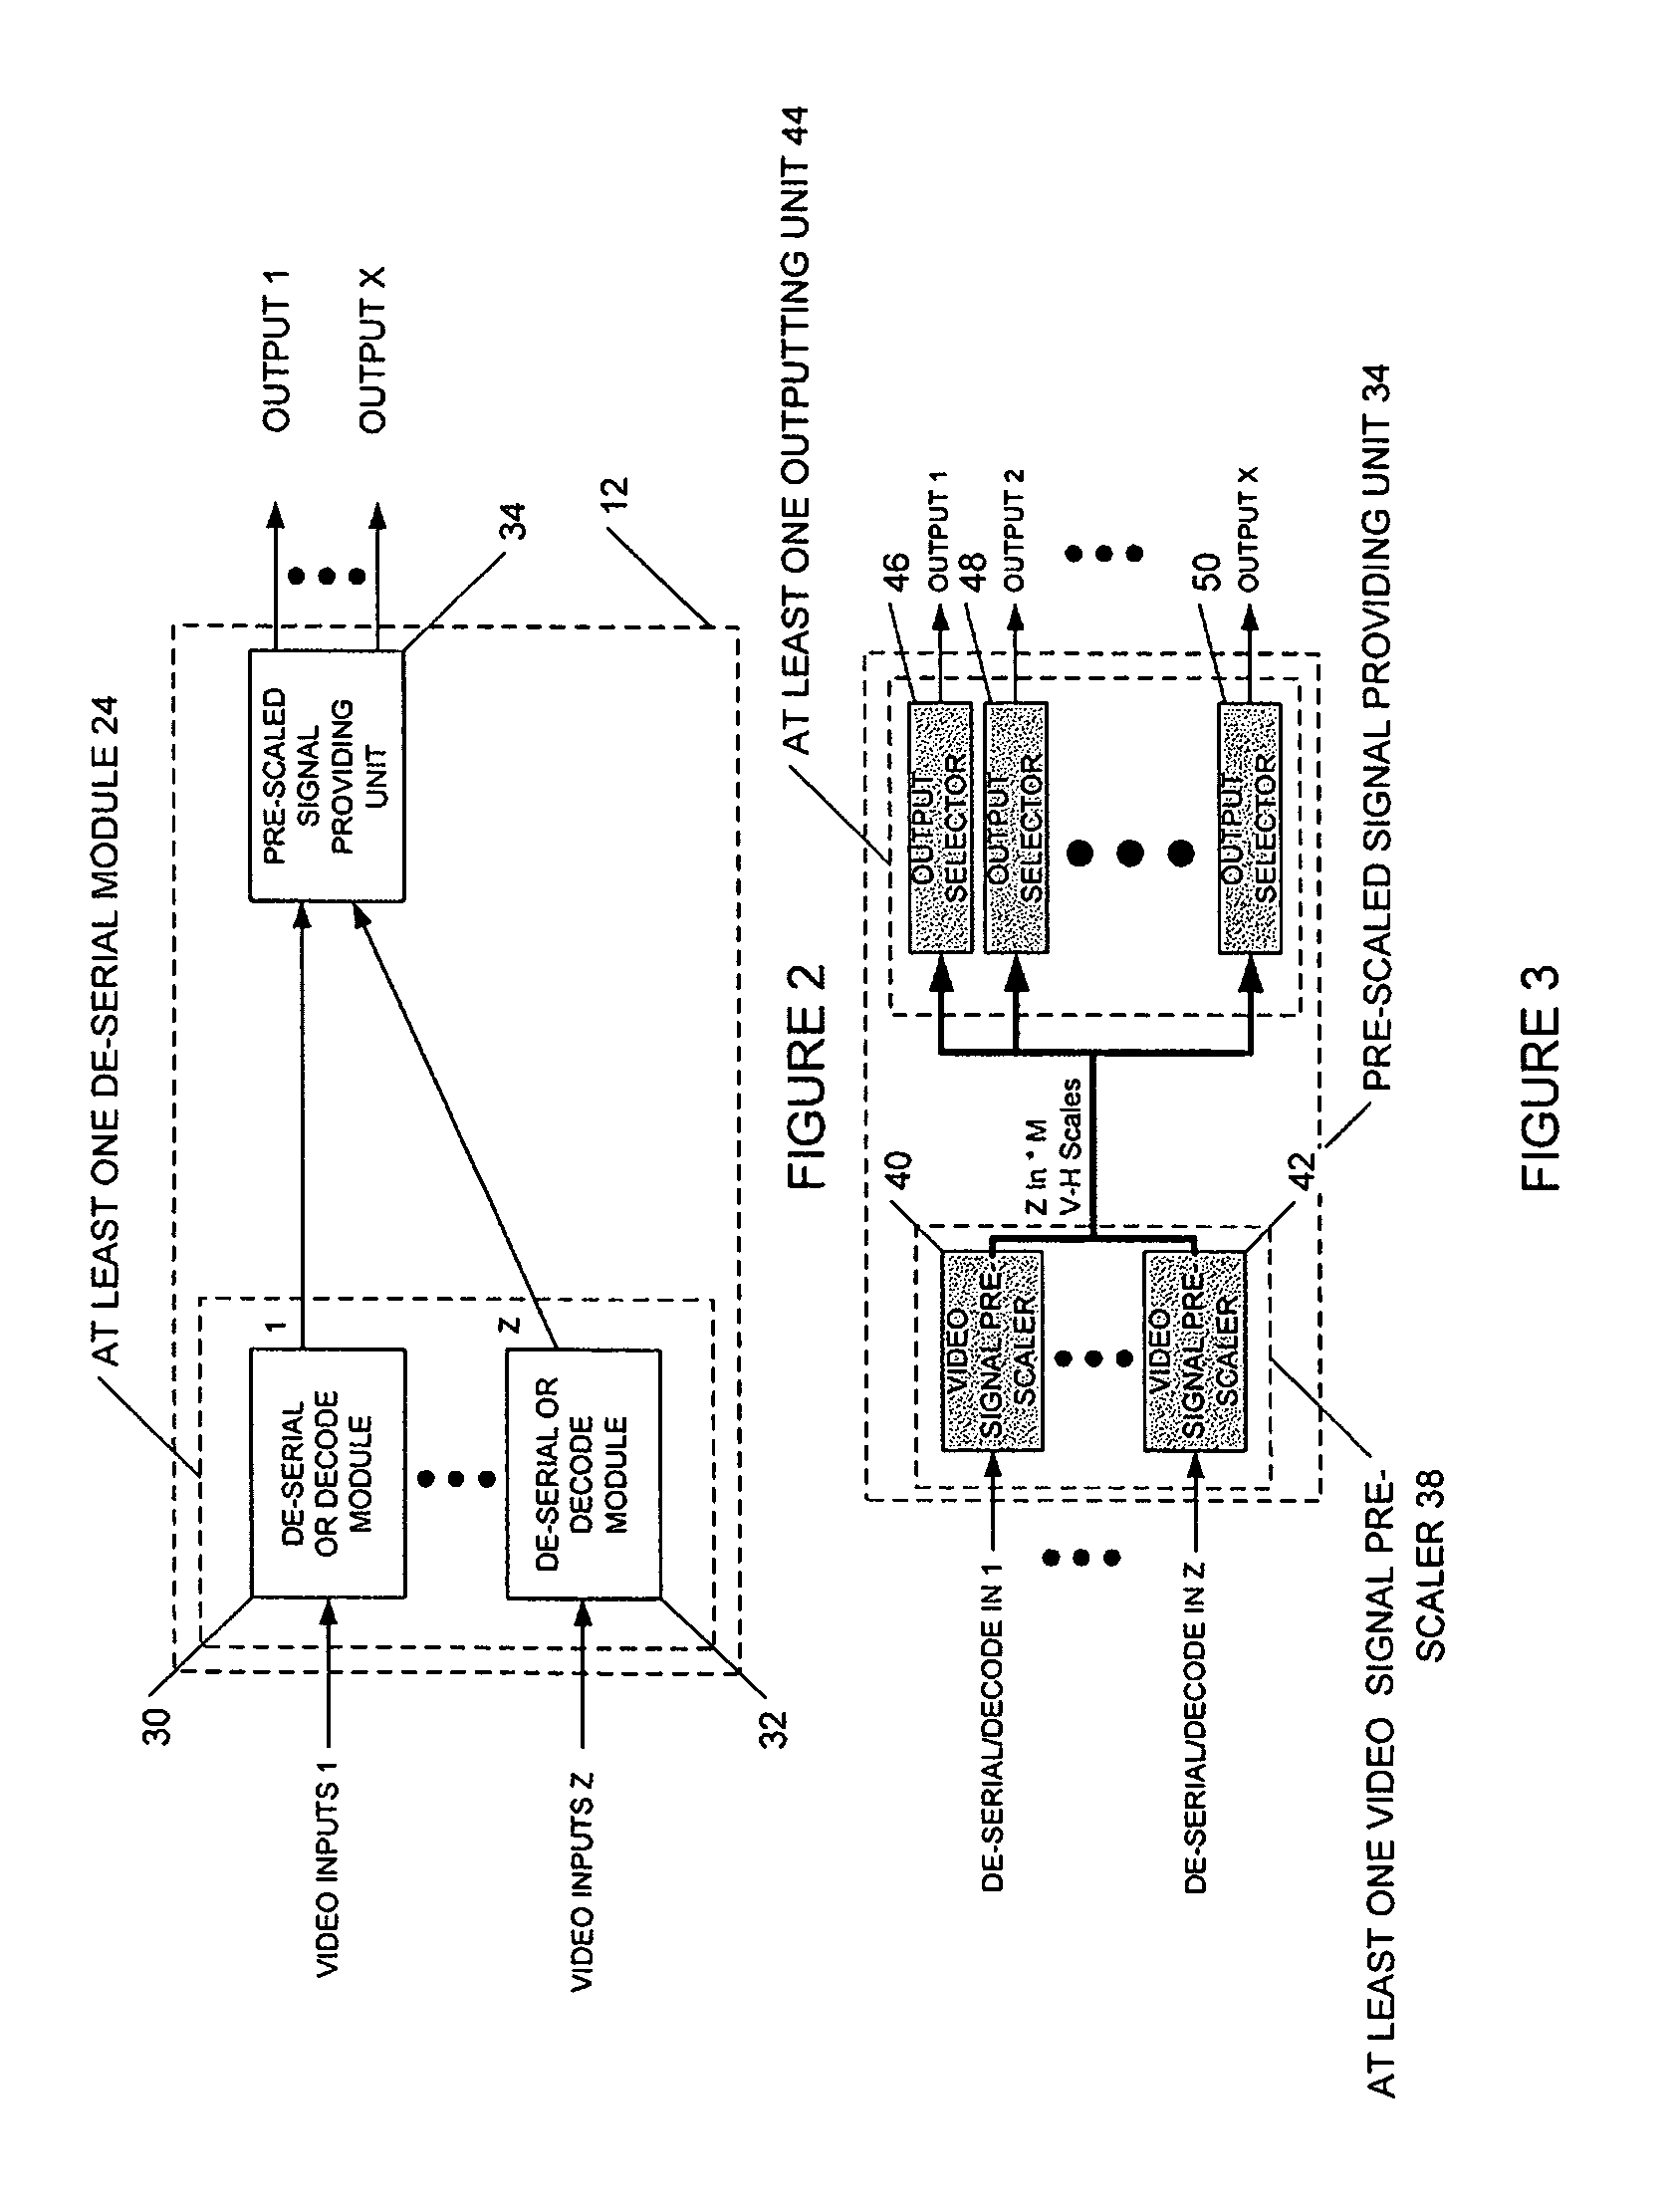 Method and apparatus for displaying at least one video signal on at least one display